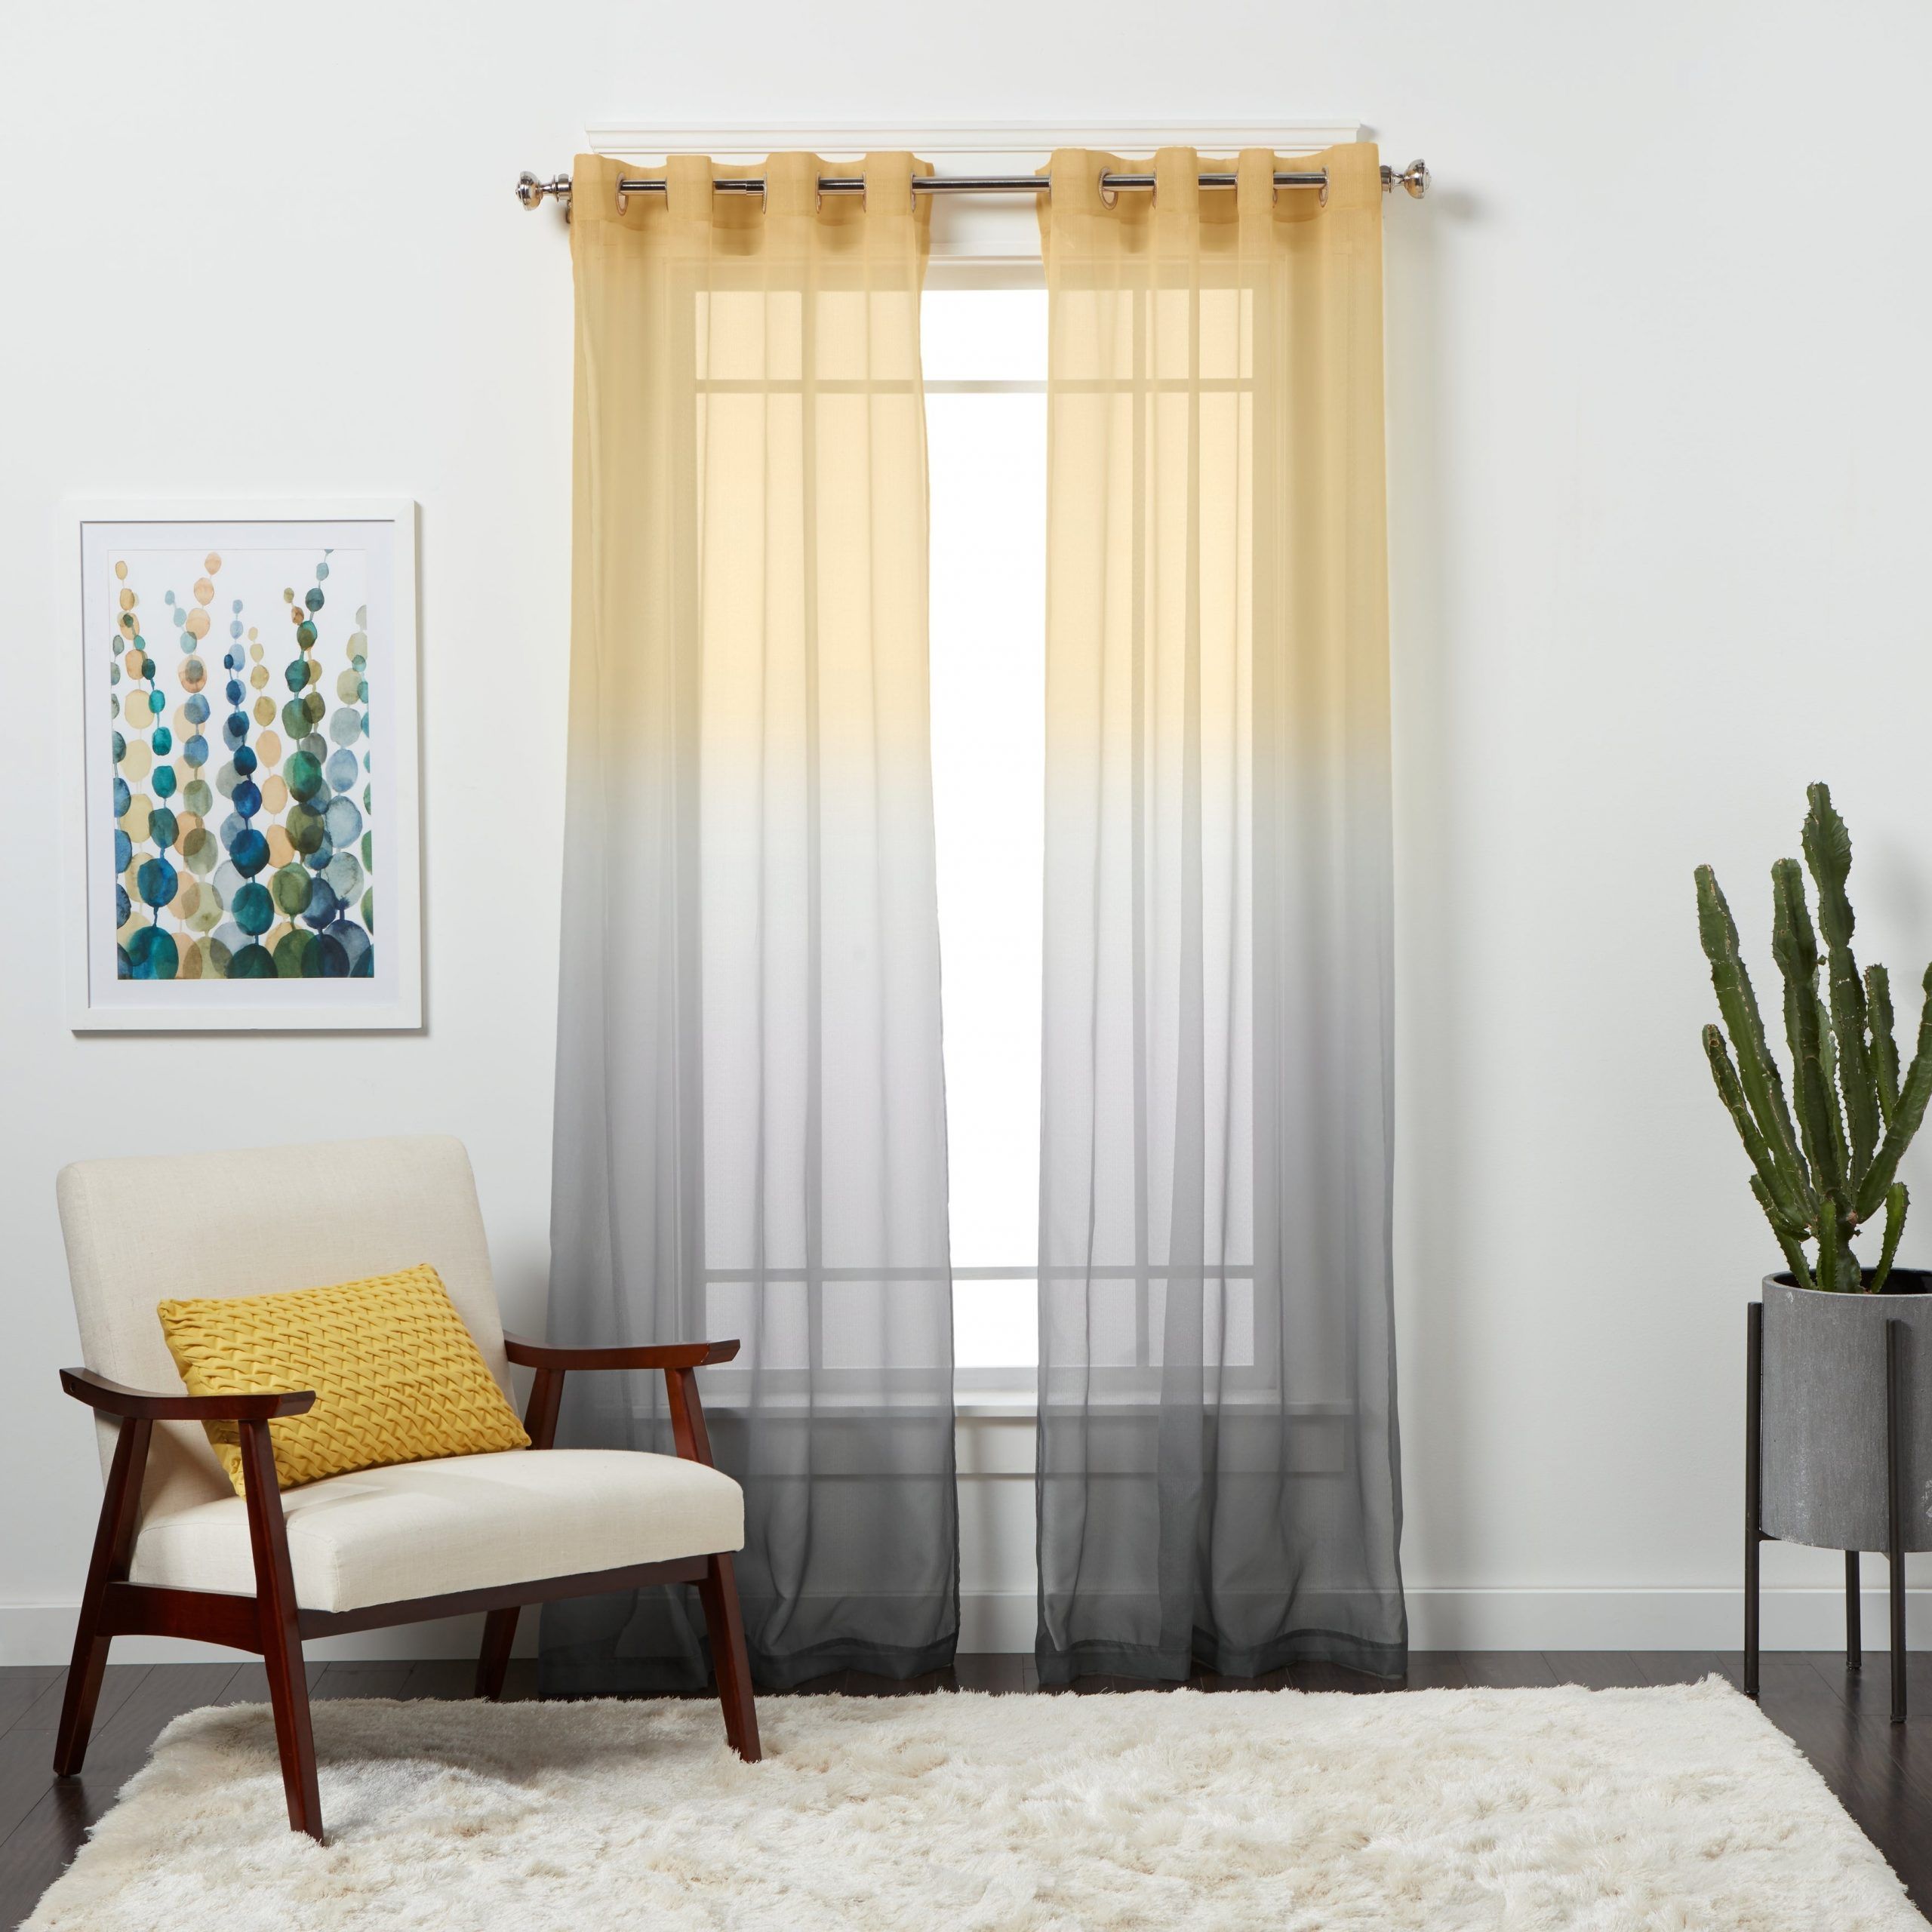 Single Curtain Panels Intended For Most Current Semi Sheer Ombre Single Curtain Panel (View 3 of 20)